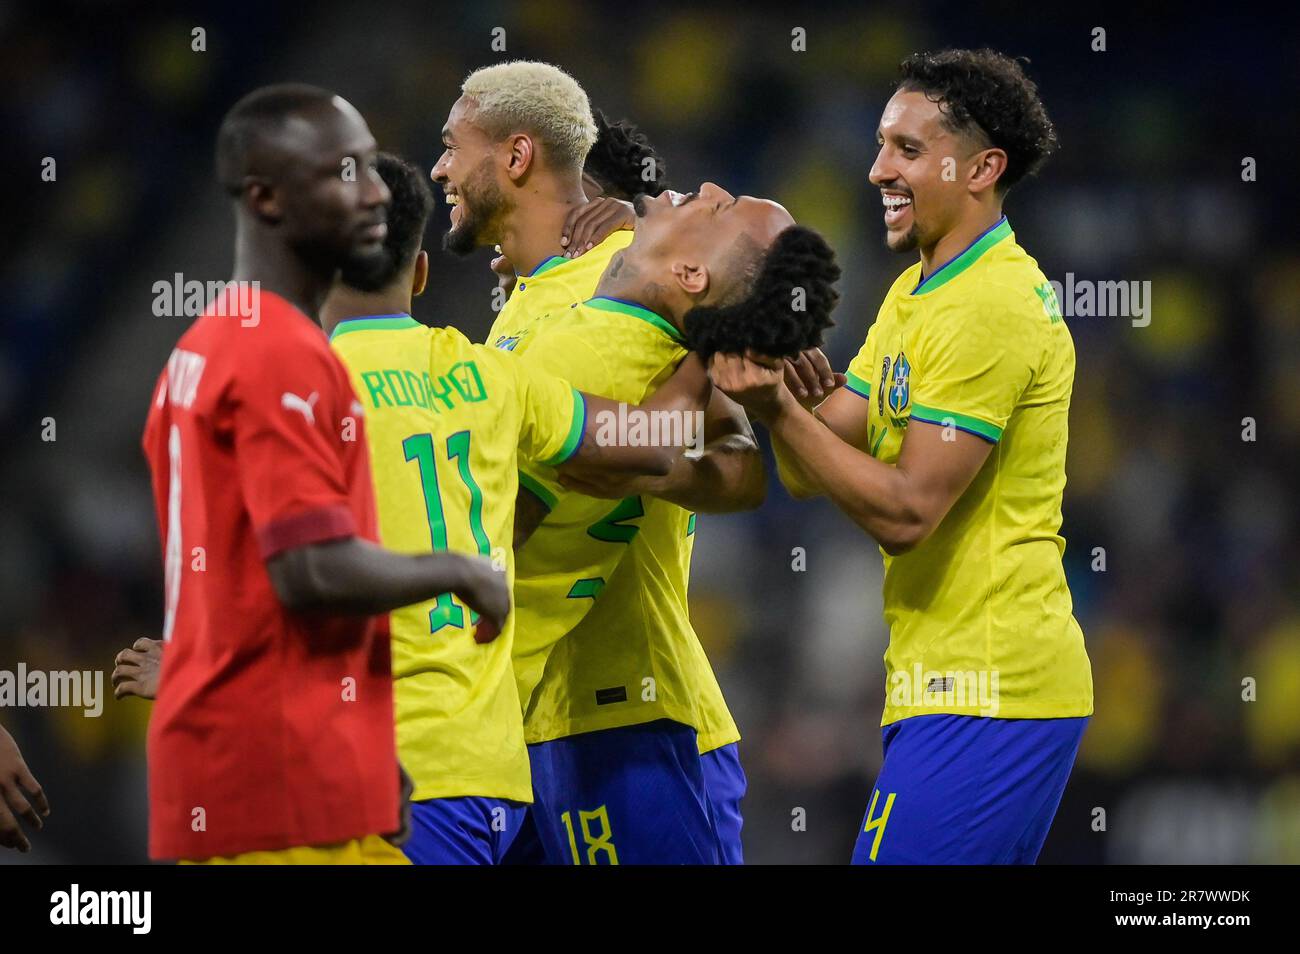 Barcelona, Spain. 17th June, 2023. Eder Militao (Brazil) celebrates after scoring his team's goal with team mates during a International Frendly match between Brazil and Guinea at Stage Front Stadium, in Barcelona, Spain on June 17, 2023. (Photo/Felipe Mondino) Credit: Live Media Publishing Group/Alamy Live News Stock Photo